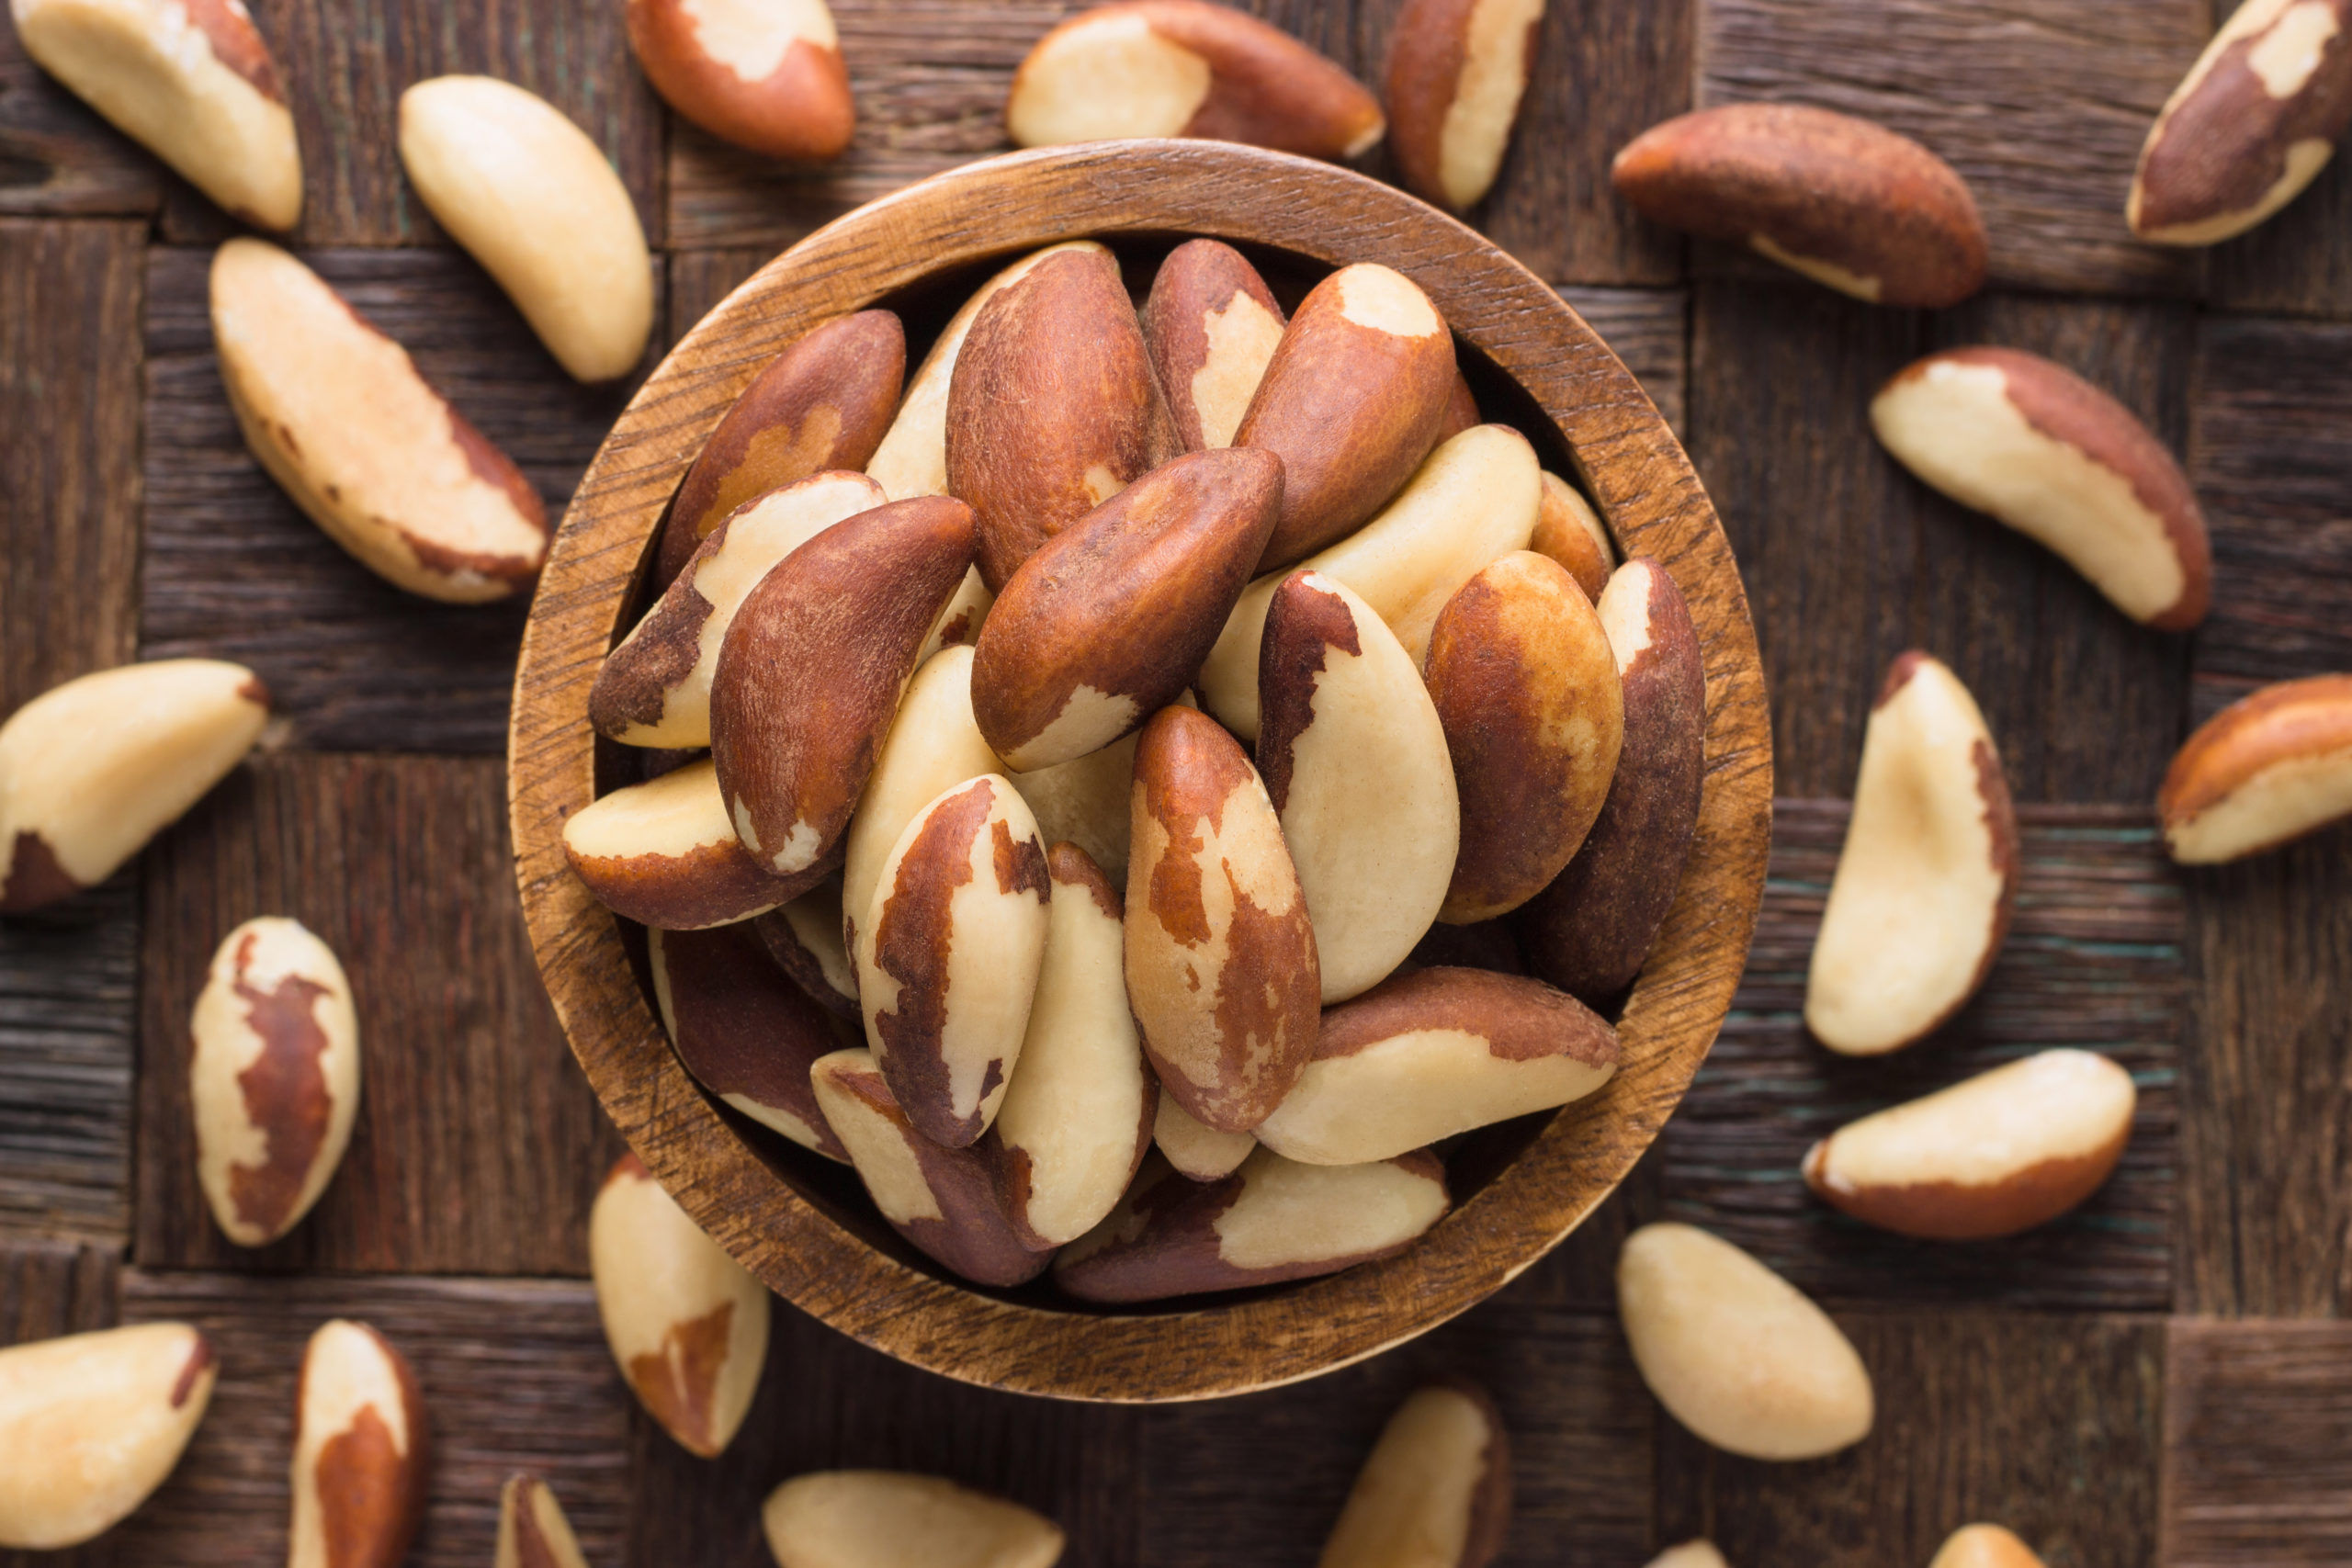 Why Brazil nuts are superfoods that you need in your diet